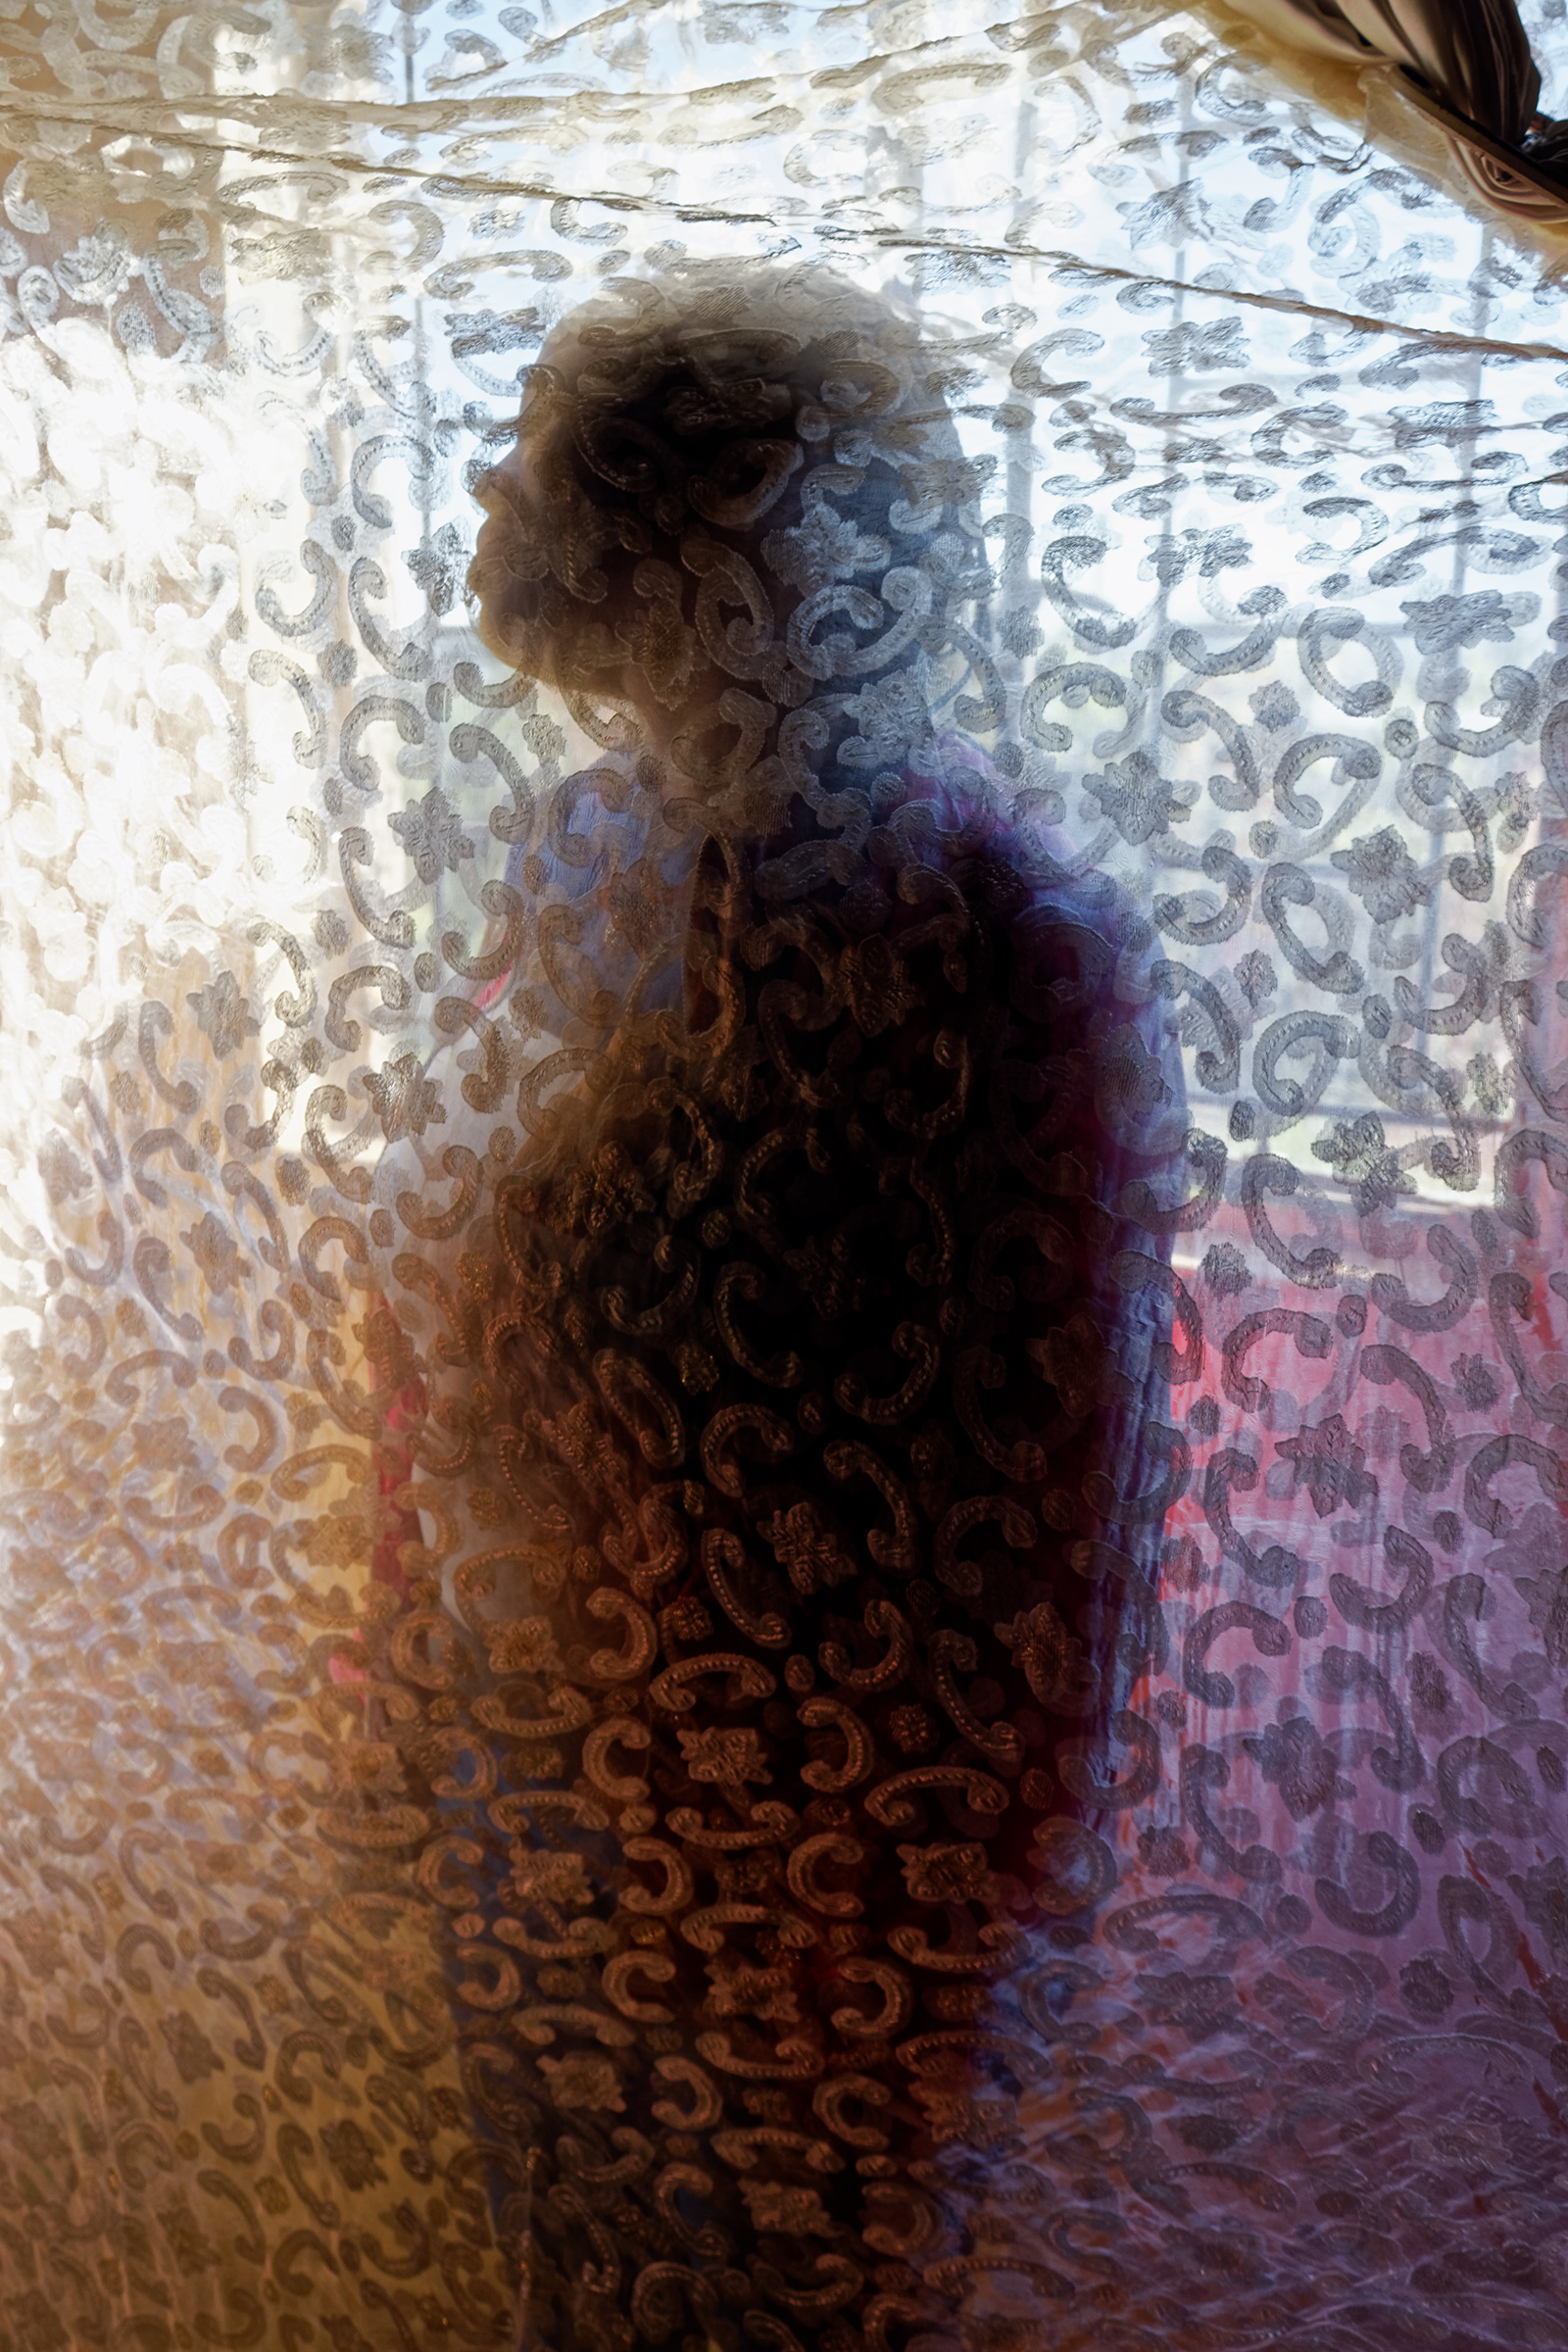 The silhouette of a person cast against semi-sheer fabric